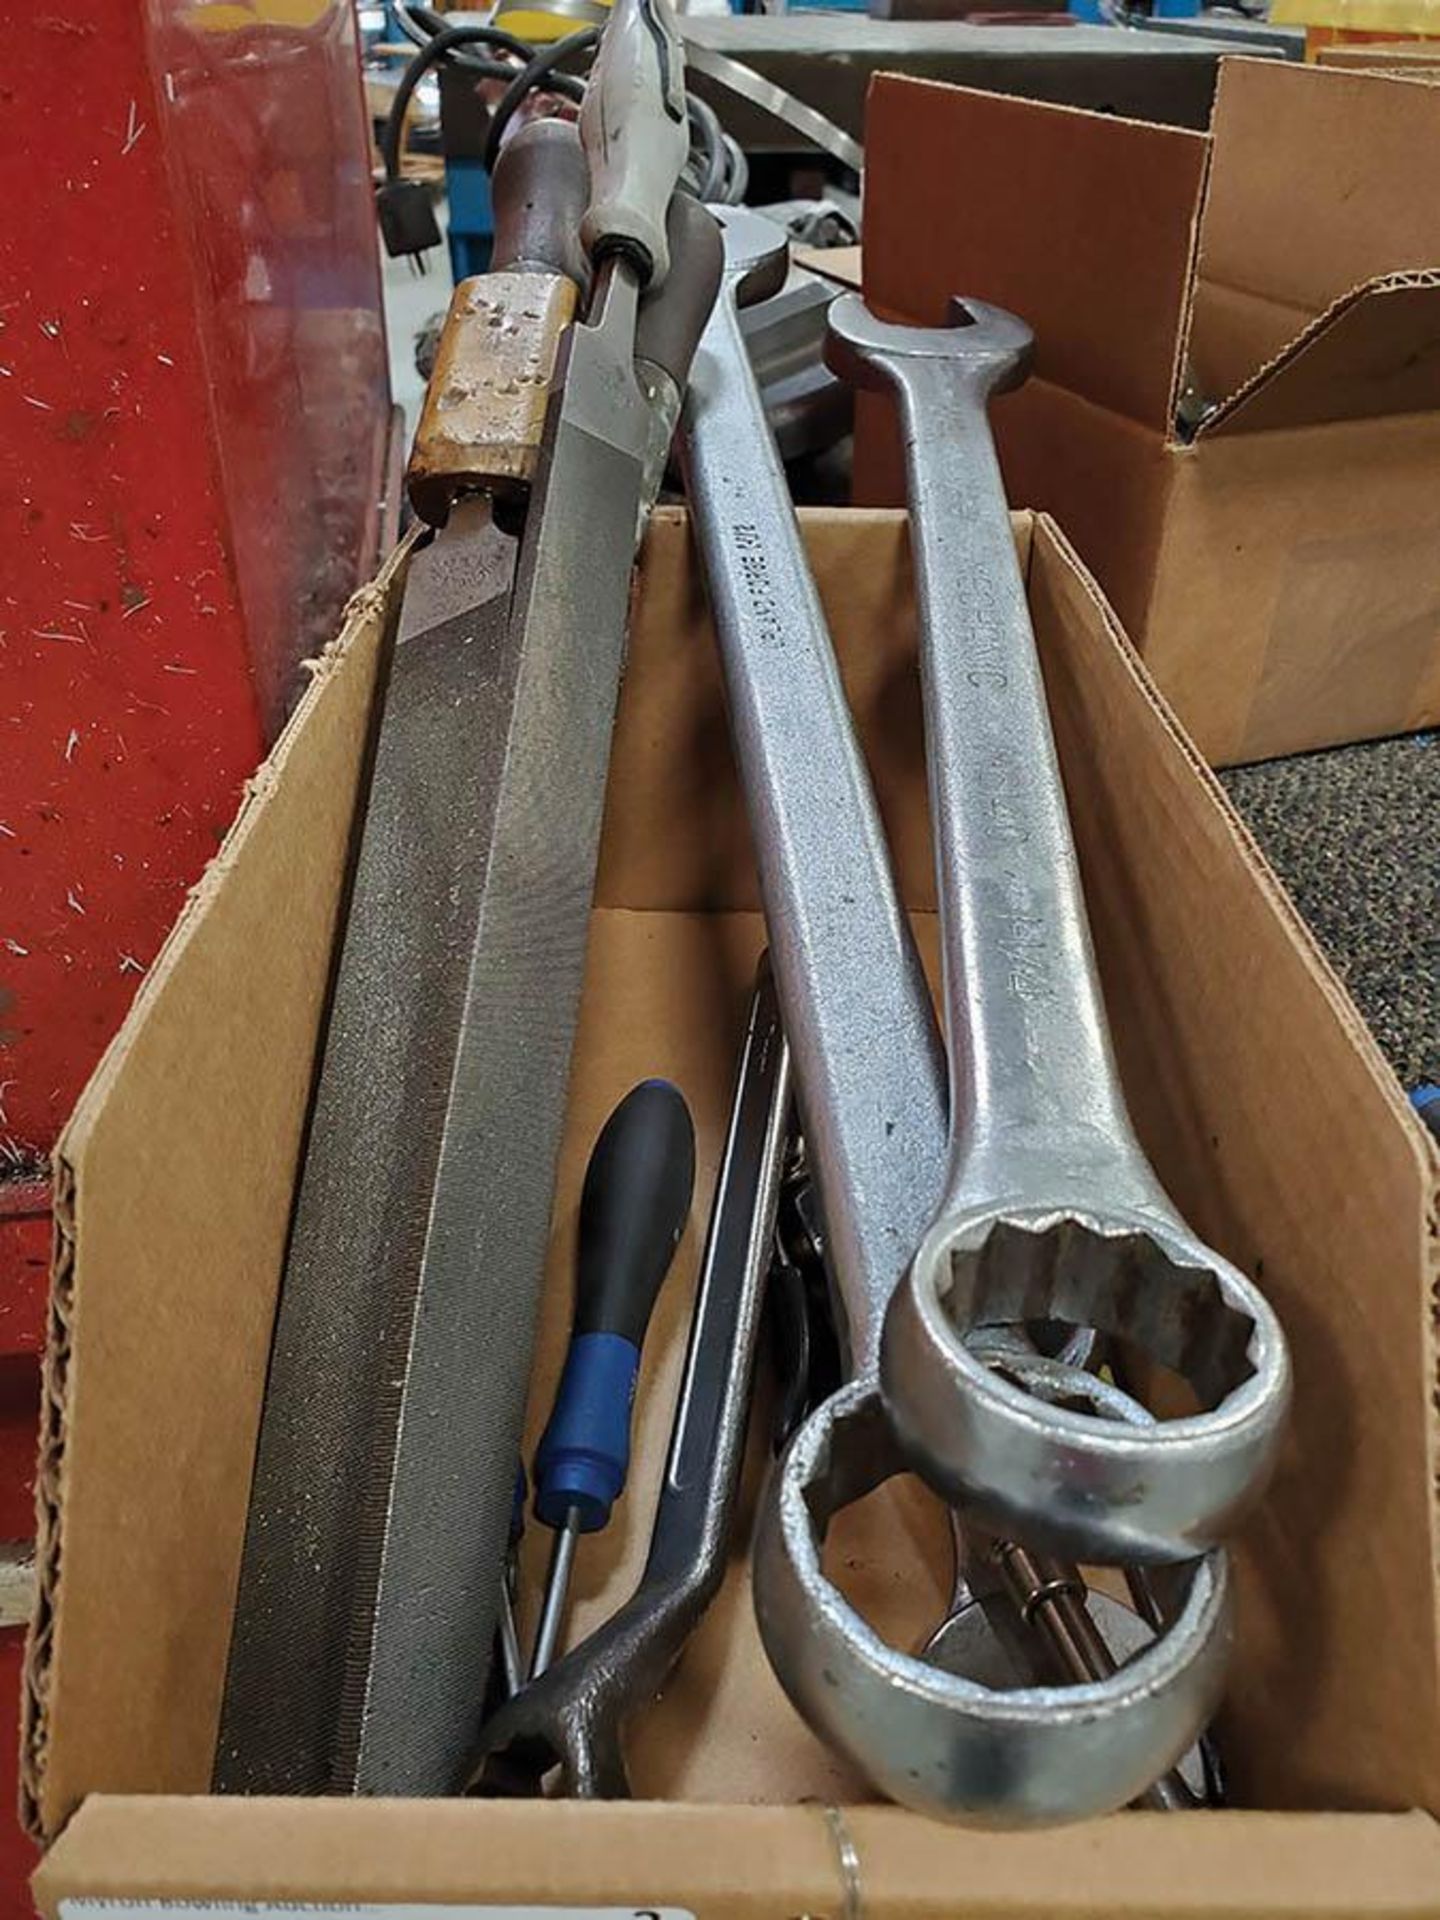 ASSORTED HAND TOOLS - CLOSED END WRENCHES, FILES, SCREW DRIVERS, ALLEN WRENCHES, STAR BIT SCREW - Image 2 of 2